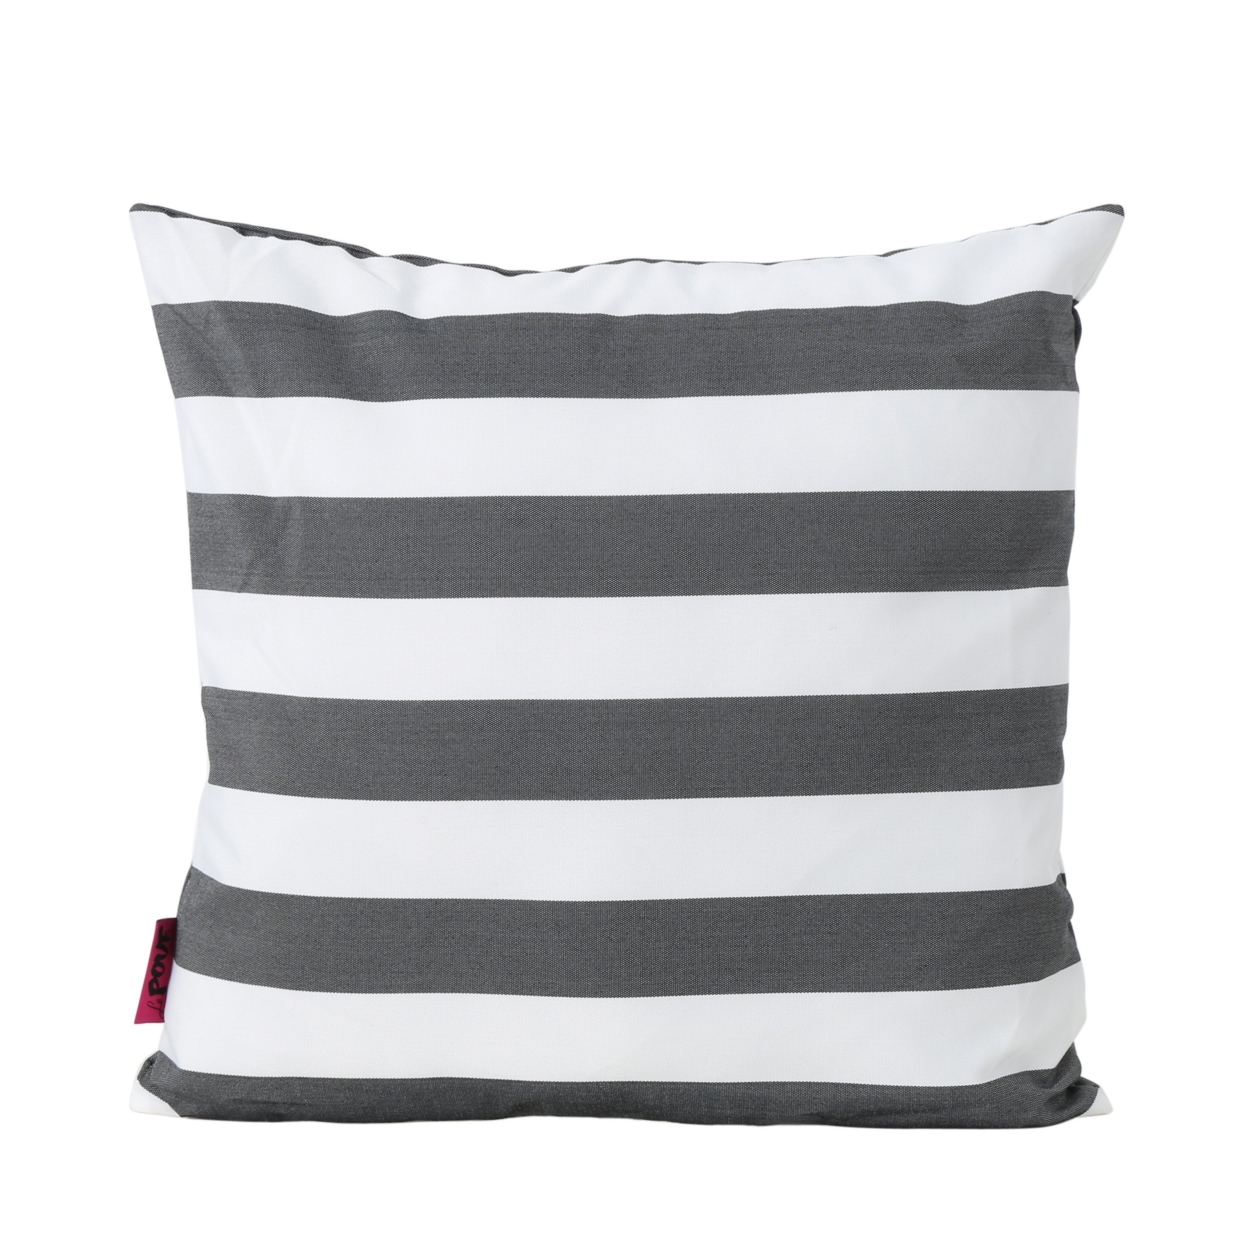 La Mesa Indoor Striped Water Resistant Square Throw Pillow - Dark Teal/white, Single